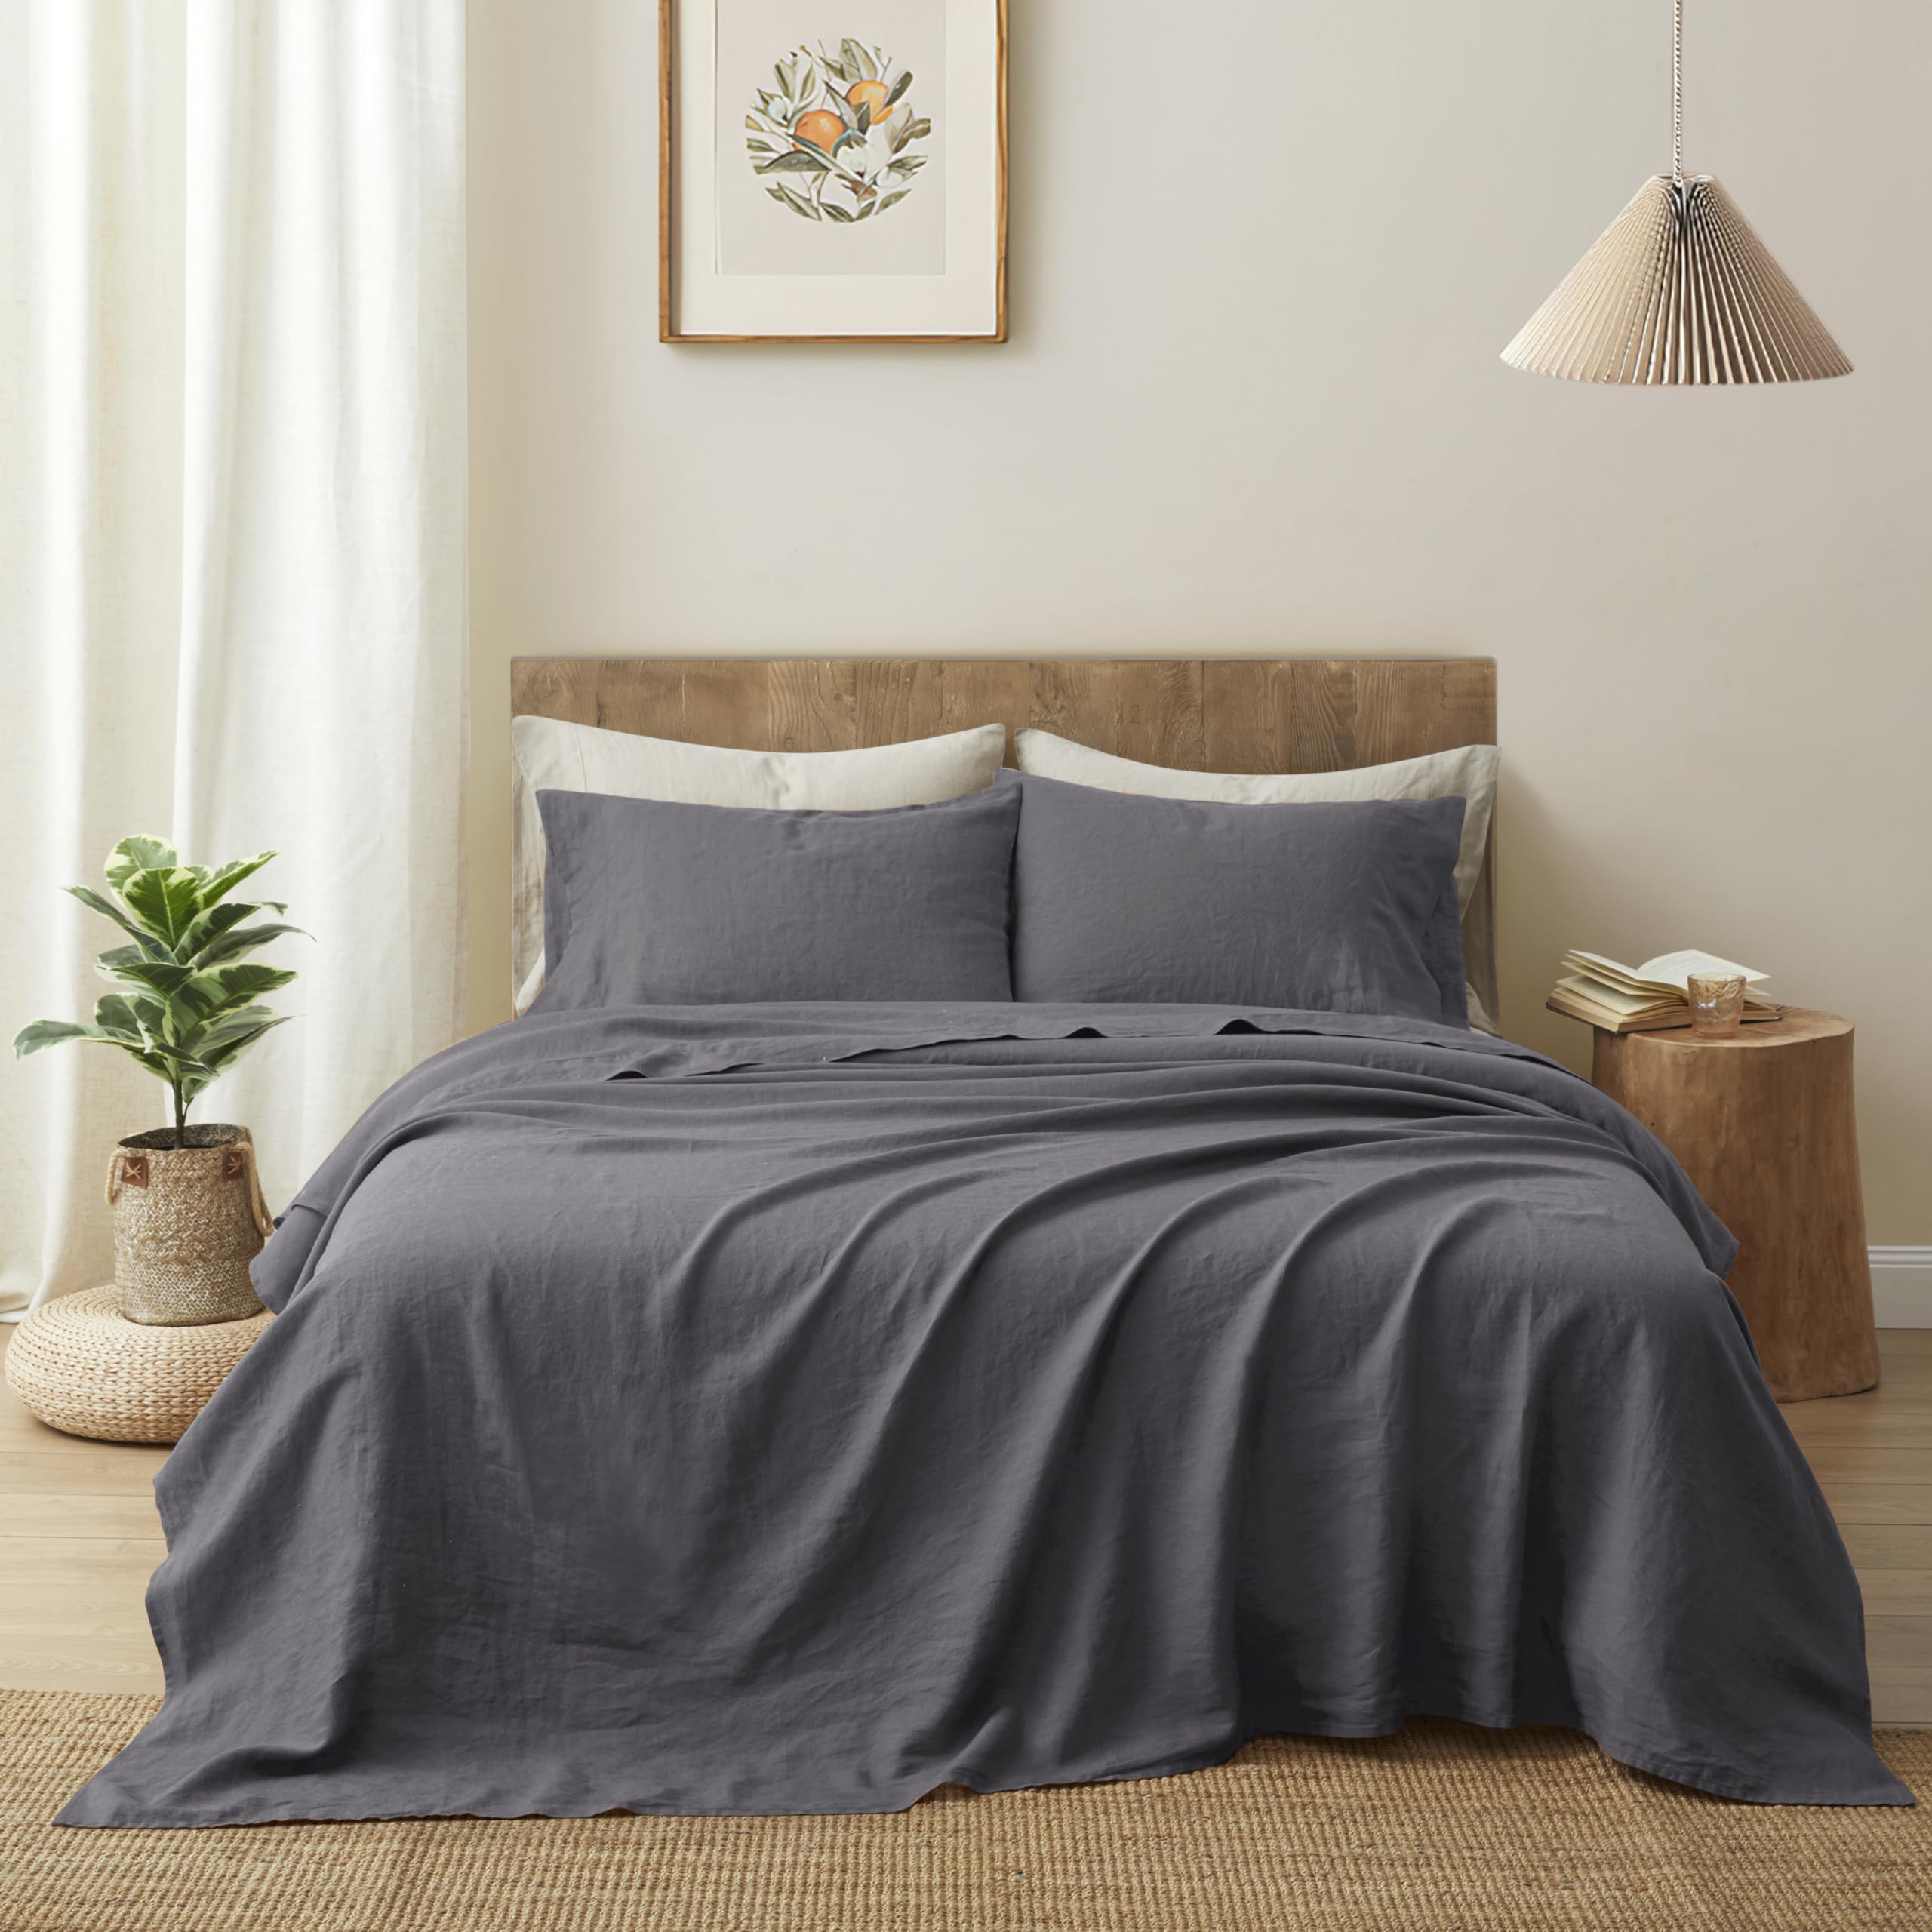 100% French Flax Linen Bedding Set